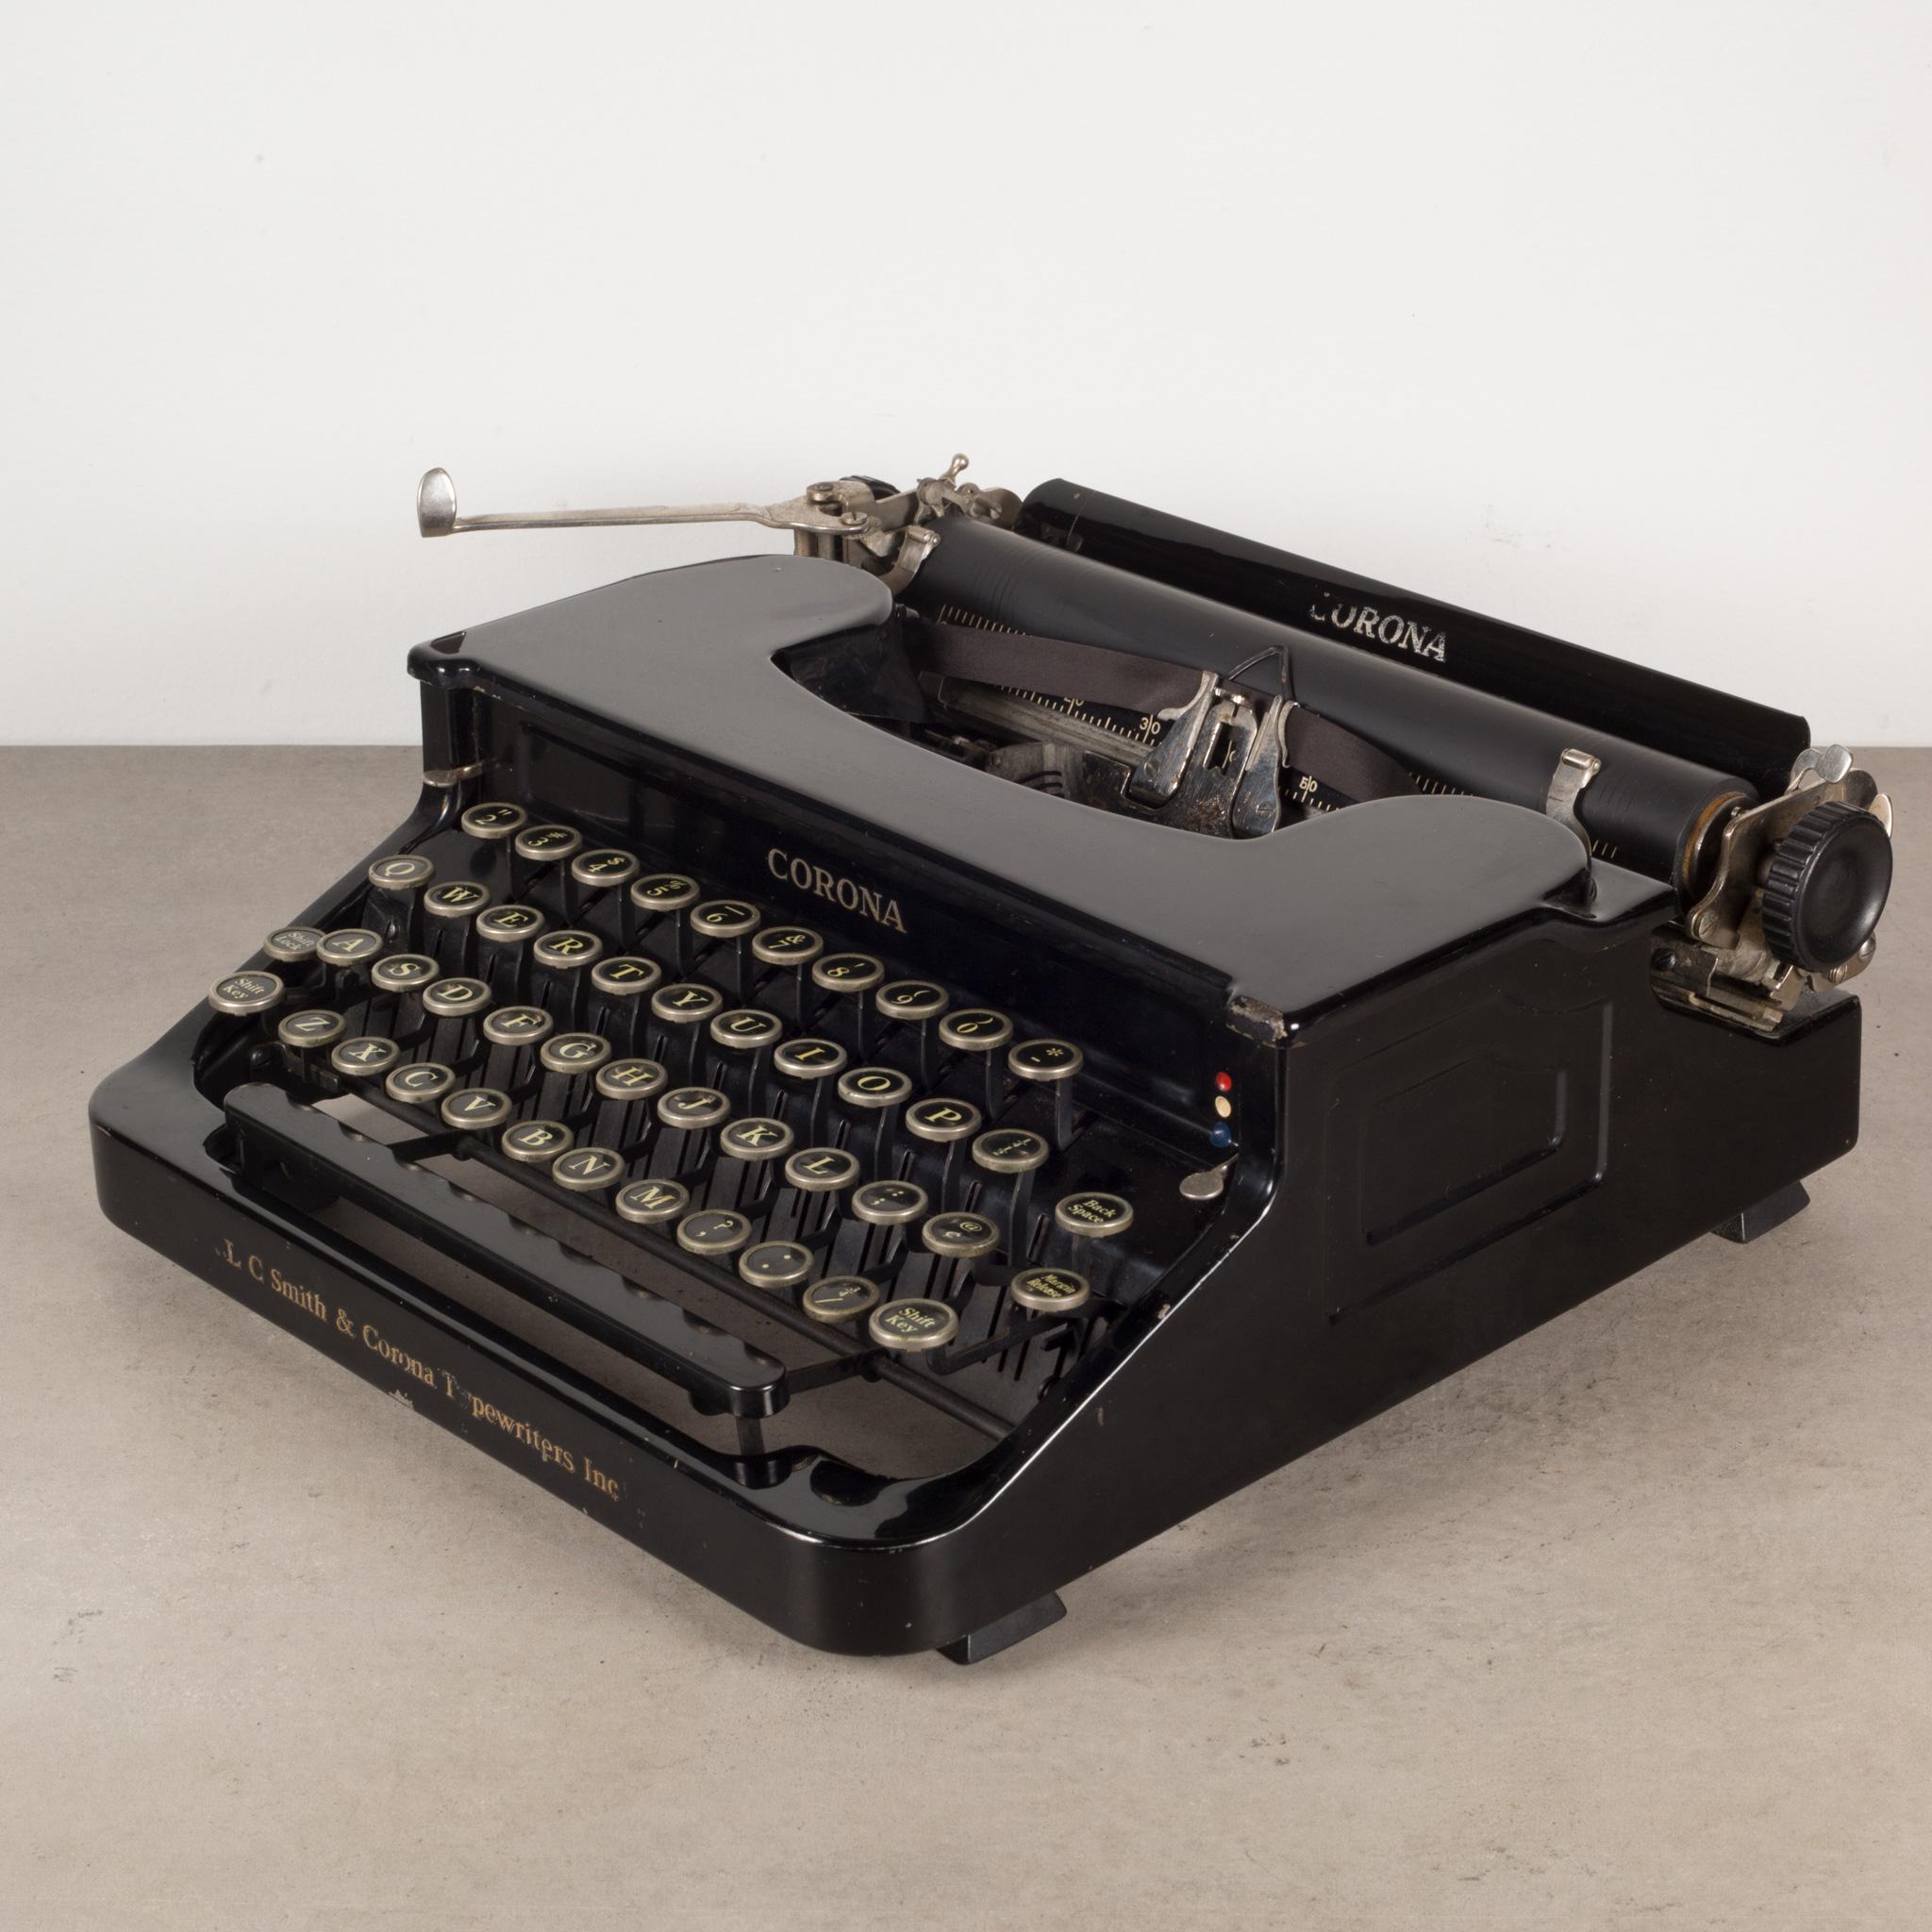 About

A fully refurbished Art Deco Corona portable typewriter in gloss black with original gold lettering and case. The keys are nickle. This typewriter has been refurbished and has smooth typing and functions very well. It has retained its